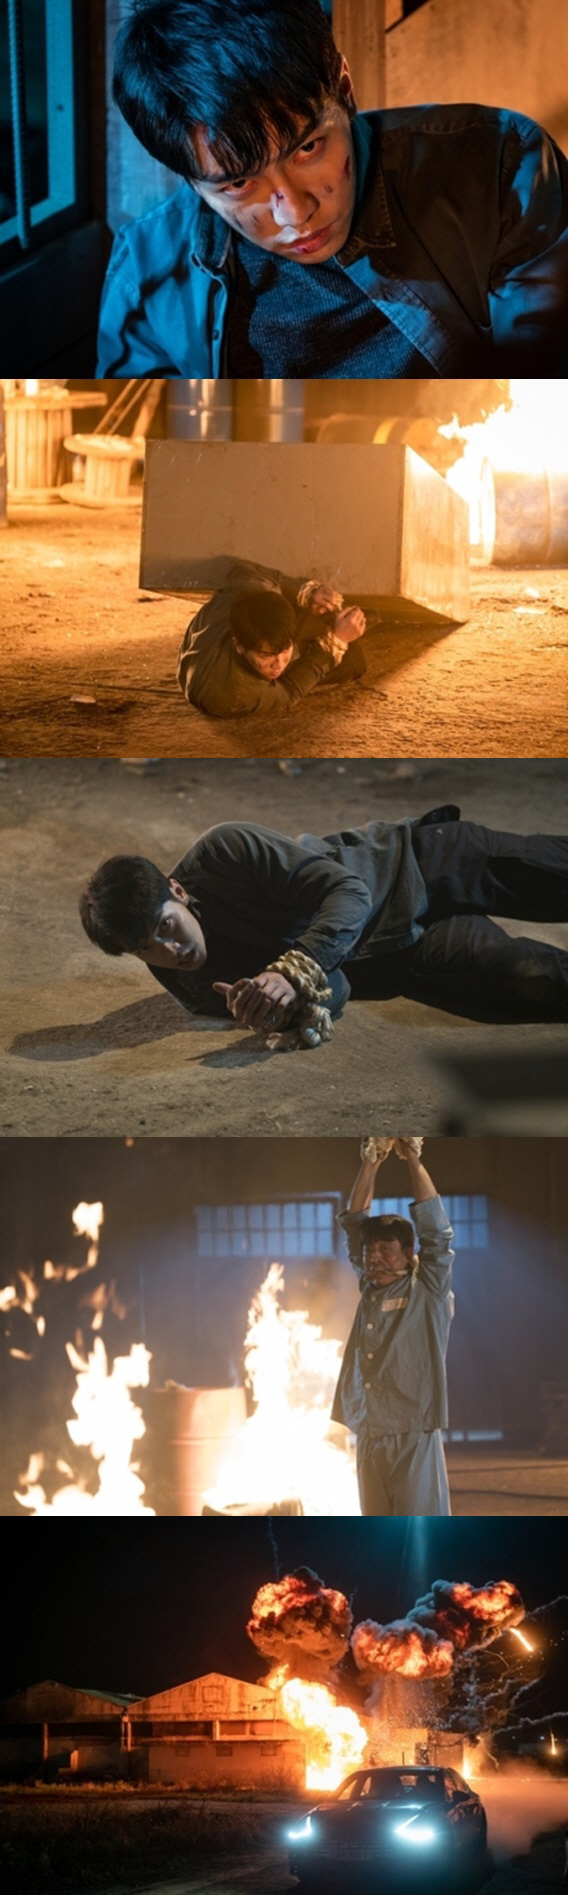 Vagabond Lee Seung-gi and Jang Hyuk-jin will show Dangers Donga Line Two Shot, which is a desperate struggle with hands tied to a burning waste warehouse.SBS gilt drama Vagabond (VAGABOND) (playwright Jang Young-chul, director Yoo In-sik / production Celltrion Healthcare Entertainment CEO Park Jae-sam) is an intelligence action melody that uncovers a huge national corruption found by a man involved in a crash of a private passenger plane in a concealed truth.With only two times left to the end, the unpredictable reversal bomb continues, and the story of Crado onion-like story is not letting the tension go to the end.In this regard, Lee Seung-gi and Jang Hyuk-jin are trapped in a burning waste warehouse and are in a situation of a fallen Danger in the 15th Vagabond broadcast on November 22nd.In the play, Lee Seung-gi and Jang Yuqi (Jang Hyuk-jin) are trapped in a waste warehouse where they can feel the scatter, tied to a rope hanging from the ceiling and unable to budge.The warehouse is surrounded by strong fire, and the chandalgun manages to escape from the ceiling, but it eventually collapses due to uncomfortable body, hidden vision, and strong firepower.Moreover, in the meantime, the waste warehouse is filled with fire and toxic gas, and the chandalgun looks at his eyes to wake up the spirit that is getting distant, but he finally loses consciousness.Kim Song Yuqi, who gagged his mouth in a prison uniform, also vomits his distress next to a burning fire with a frightened look that seems to burst into tears at once.In the last broadcast, Cha Dal-gun met Oh Sang-mi (Kang Kyung-heon), who was hiding his trail after being released from detention center, and Kim Song Yuqi was detained in a psychiatric ward by Jerome.How Cha Dal-geon and Kim Song Yuqi were trapped in a waste warehouse and threatened with their lives, and they are creating extreme tensions about how they can get through the dizzying Danger situation.Lee Seung-gi and Jang Hyuk-jins Dangers Donga Line Two Shot screen was shot at a waste warehouse in Yongin-si, Gyeonggi-do.Lee Seung-gi and Jang Hyuk-jin appeared in thin costumes in the drama setting, despite the chilly weather, and continued to prepare for the scene.Moreover, due to the nature of the scene, I admired the production team with a strong enthusiasm for rehearsing several times without any hesitation even in the condition that my hands and body were tied with a Dong-A line to draw OK cut at once.Especially in the play, the two people, who are hostile but in fact, are in a good relationship, return their break time and monitor each others screens and give generous advice to the scene.Celltrion Healthcare Entertainment said, I am grateful to Lee Seung-gi and Jang Hyuk-jin, who have burned their passion even in cold weather.I will not let viewers down with the impact development until the end. 